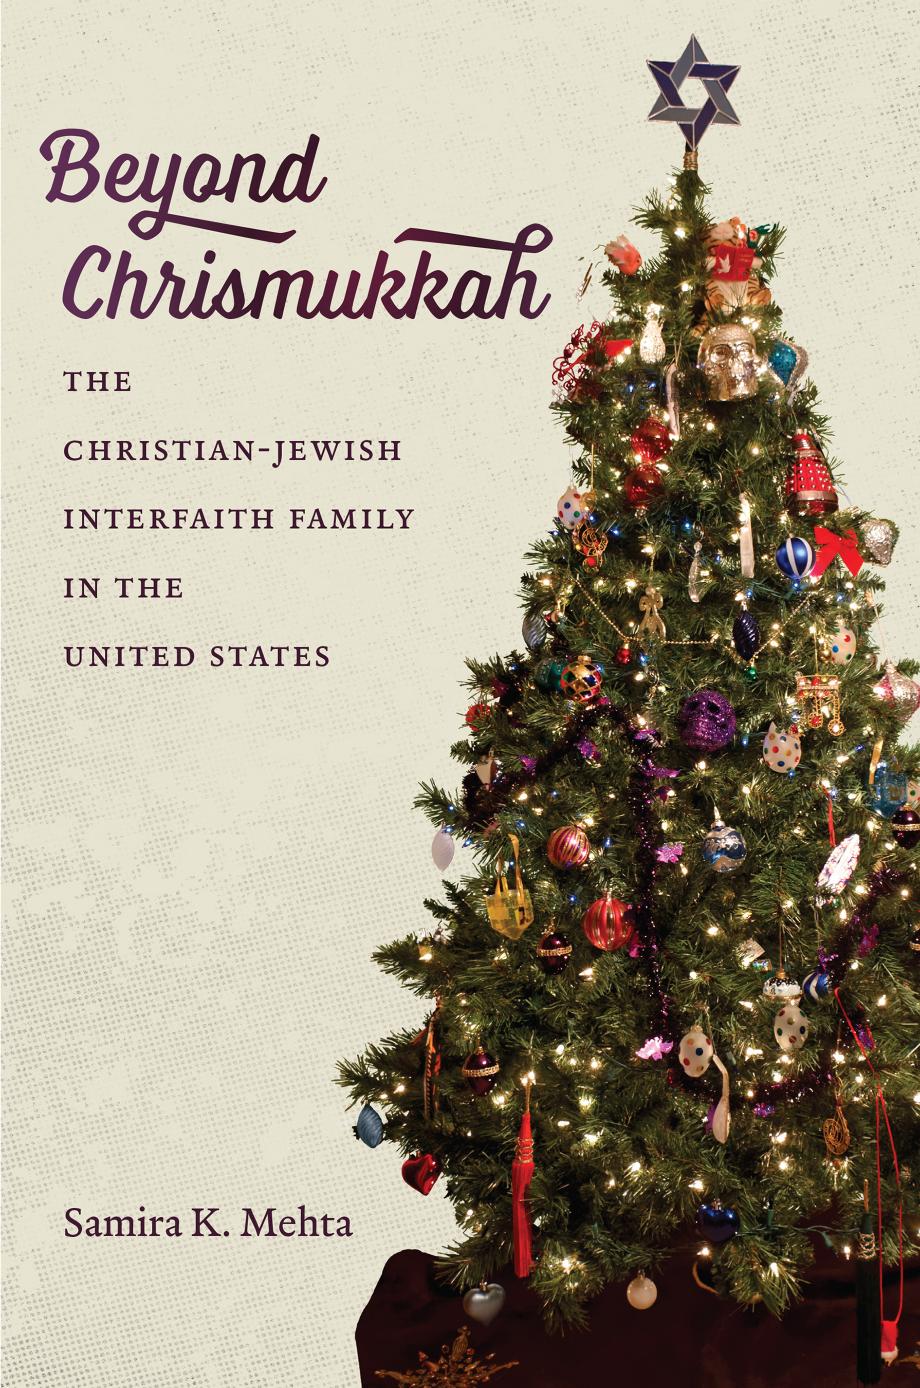 Beyond Chrismukkah: The Christian-Jewish Interfaith Family in the United States by Samira K. Mehta